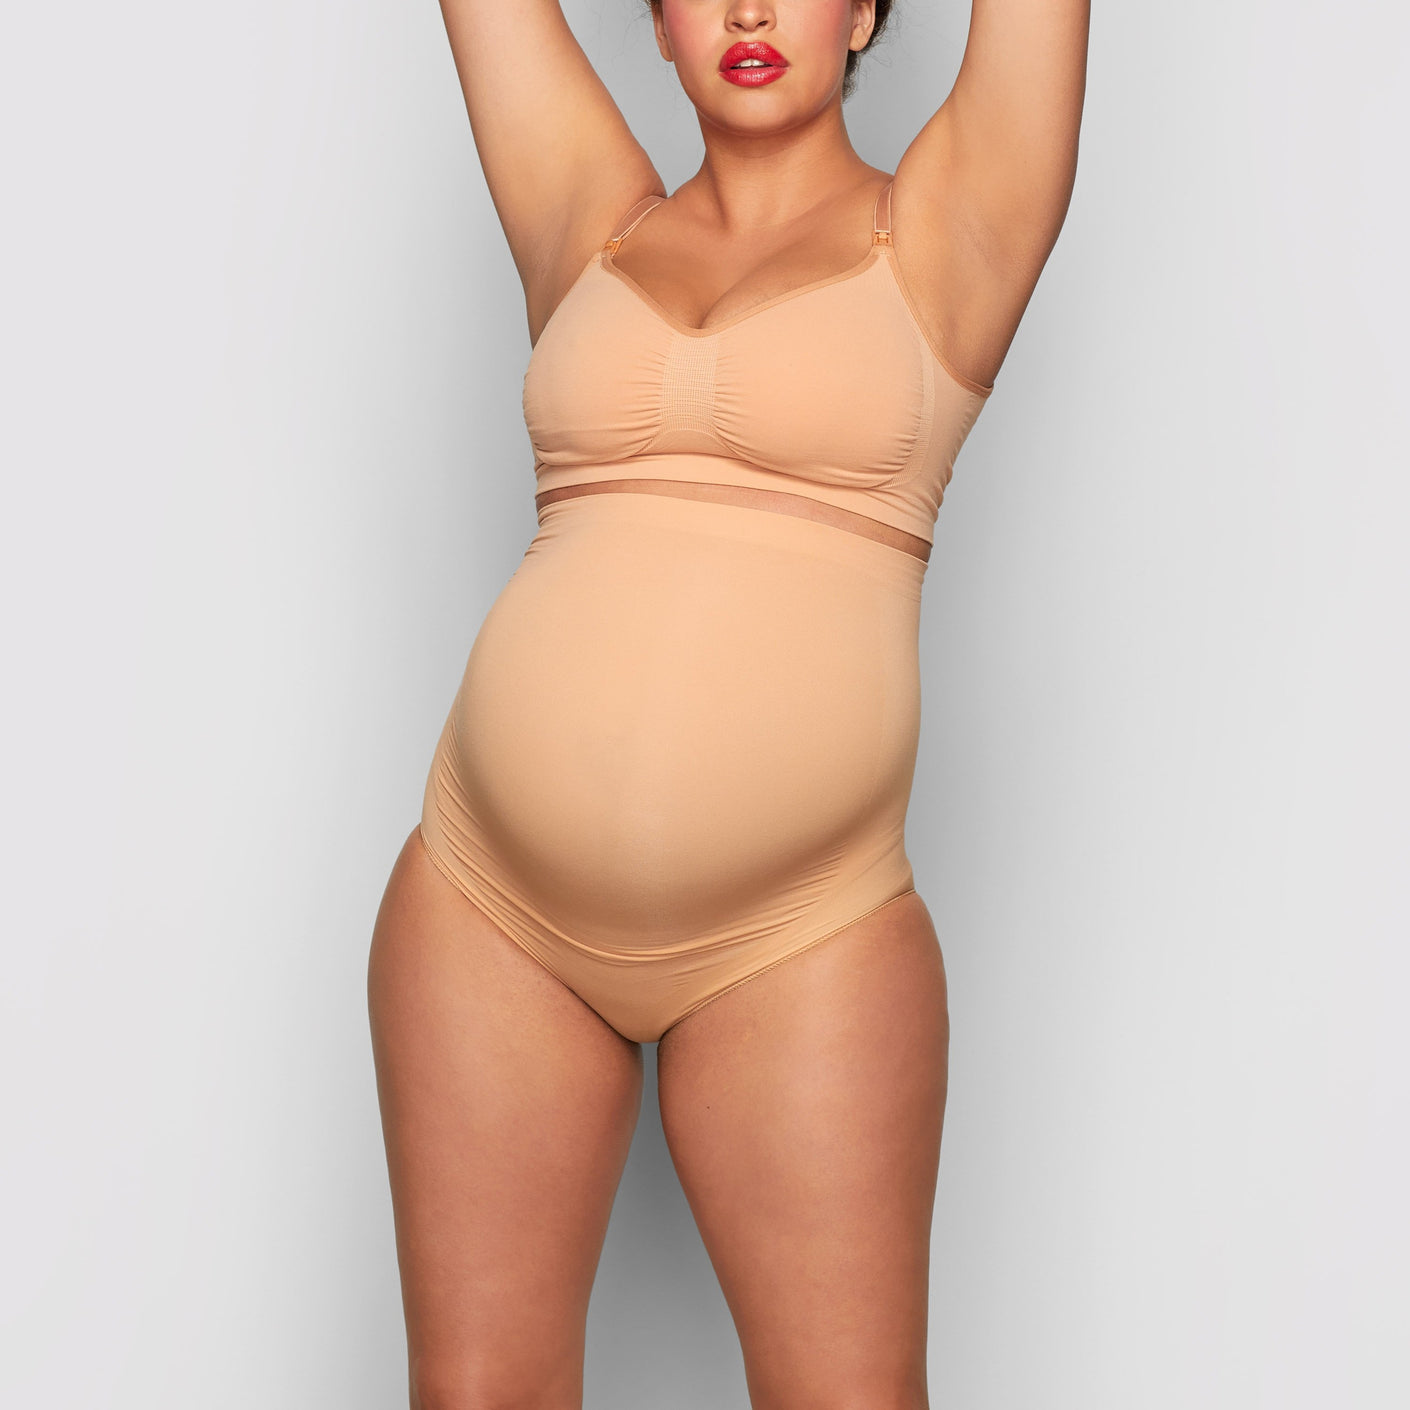 Large Breast Feeding Underwear in Front of Pregnant Women Thin